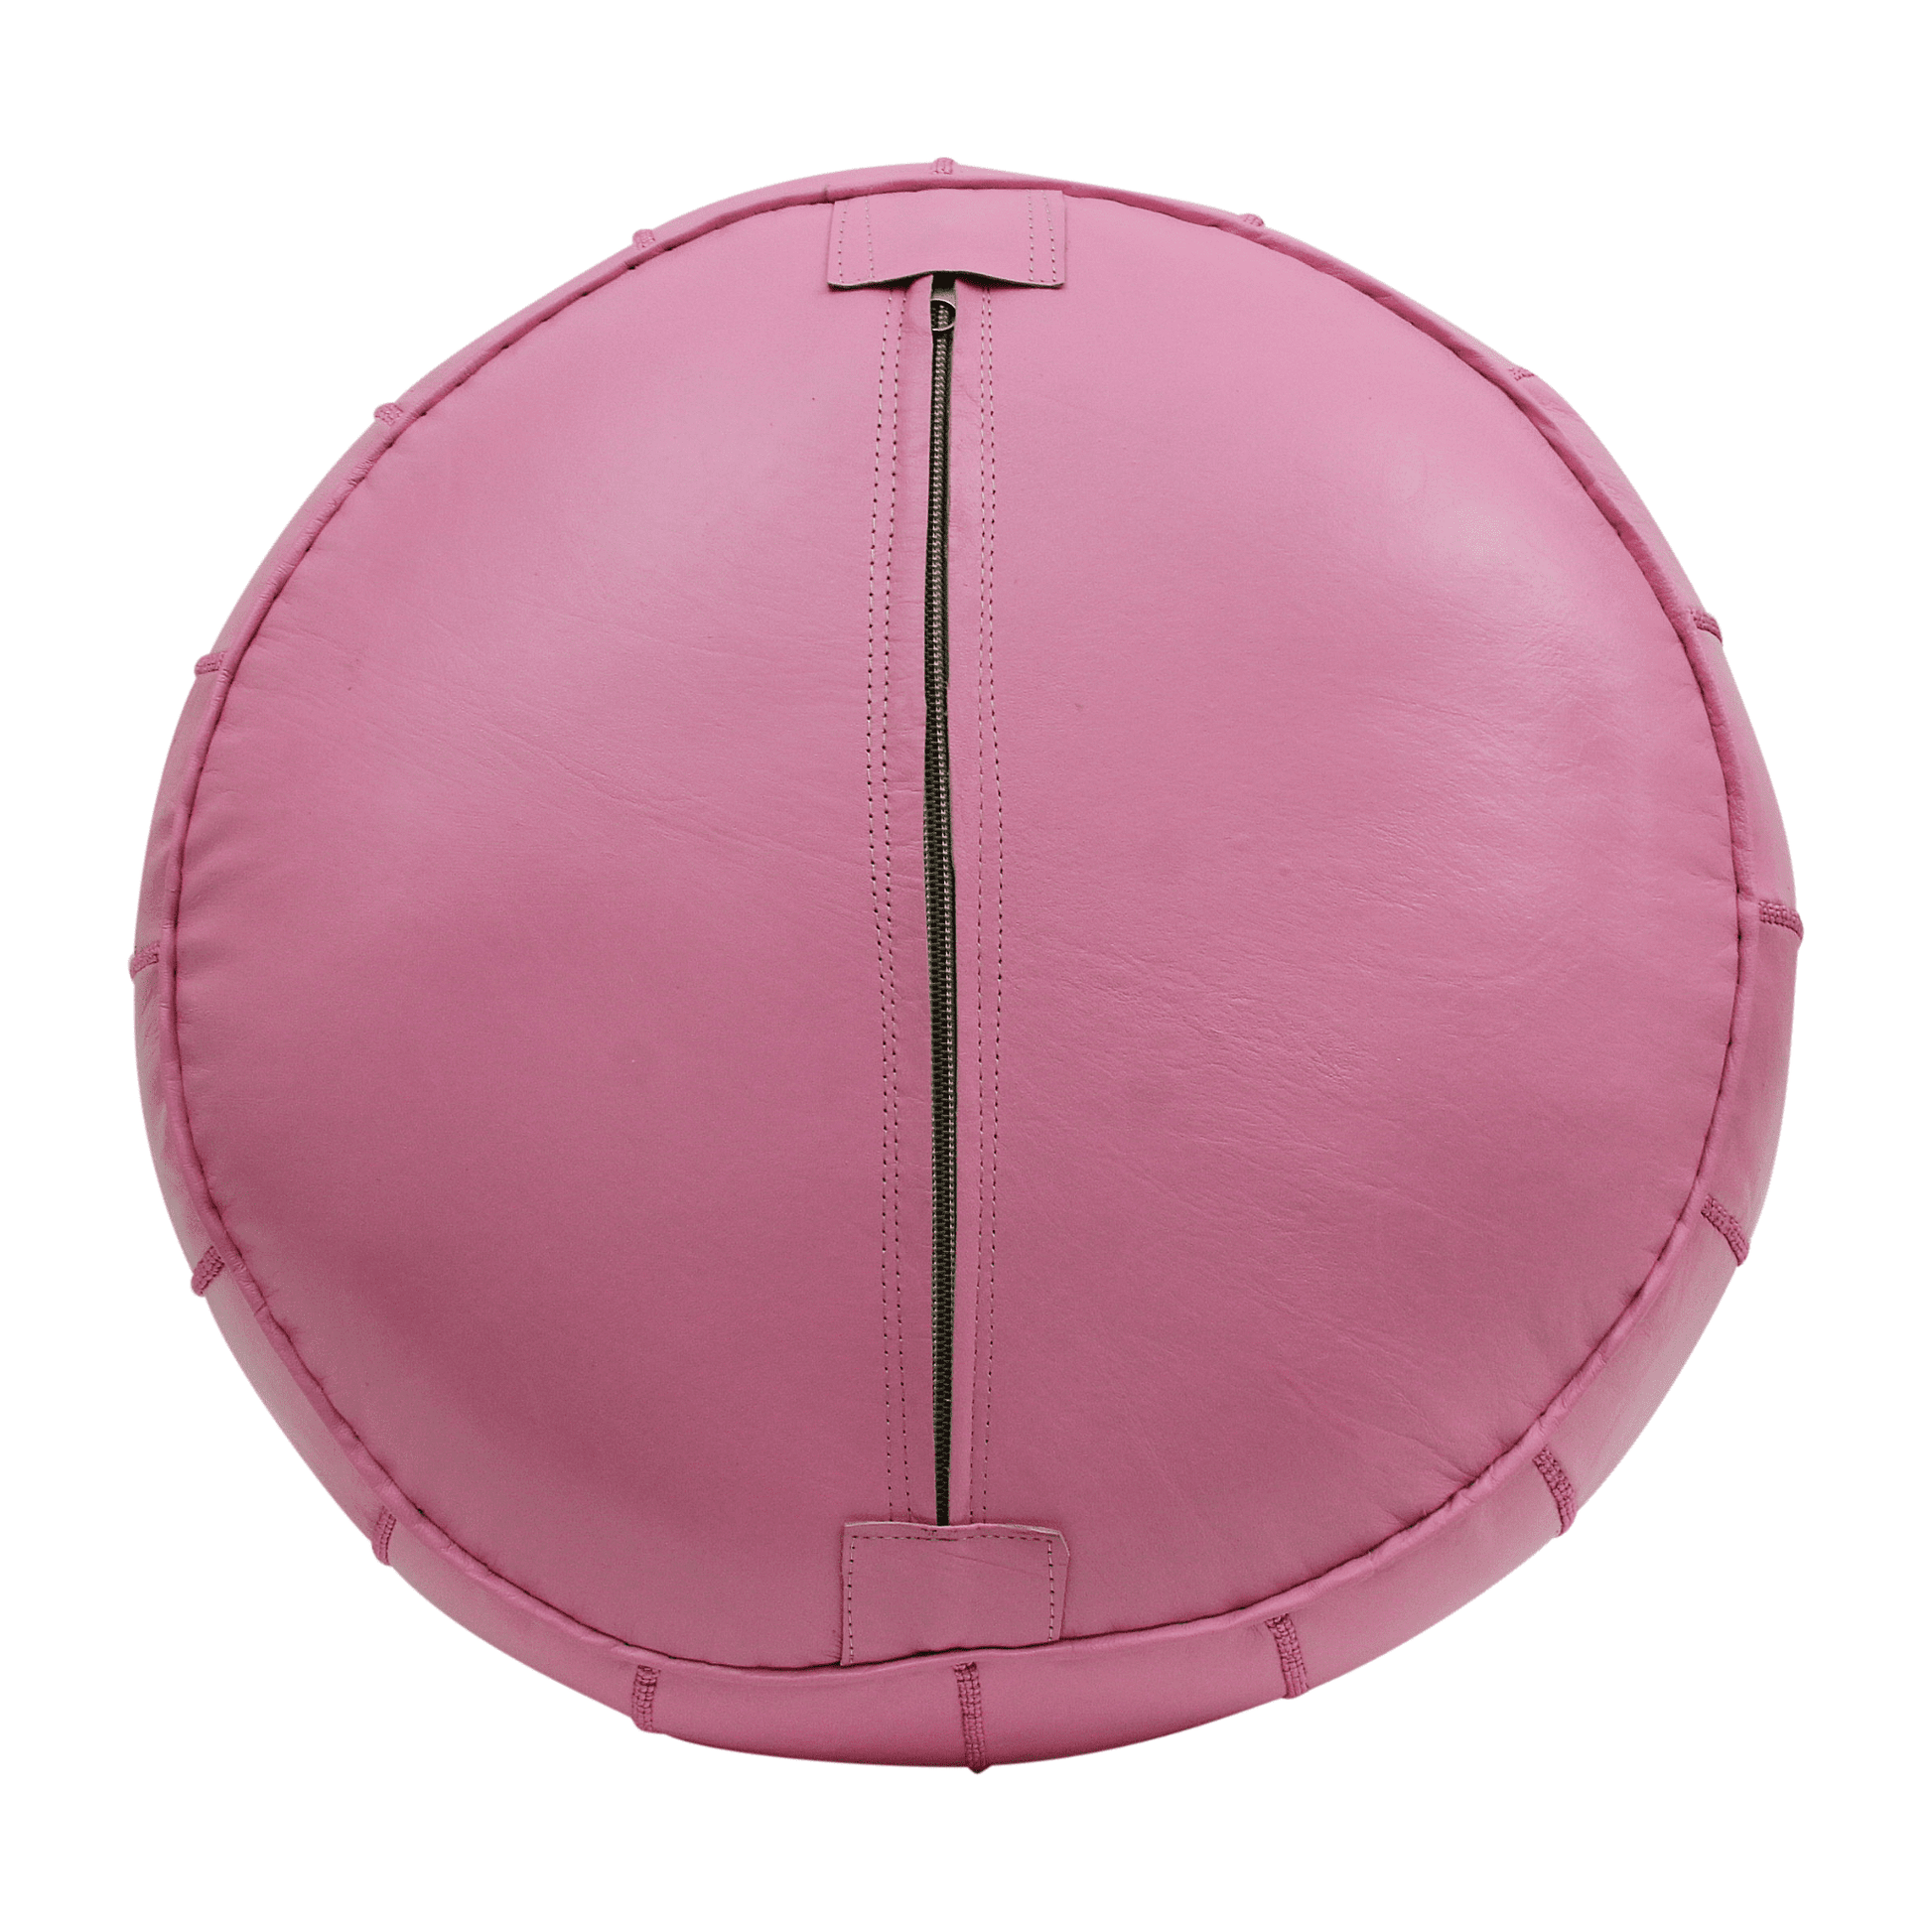 moroccan-pouffe-pouf-ottoman-footstool-cover-only-or-stuffed-pink-leather-cover-only-or-stuffed